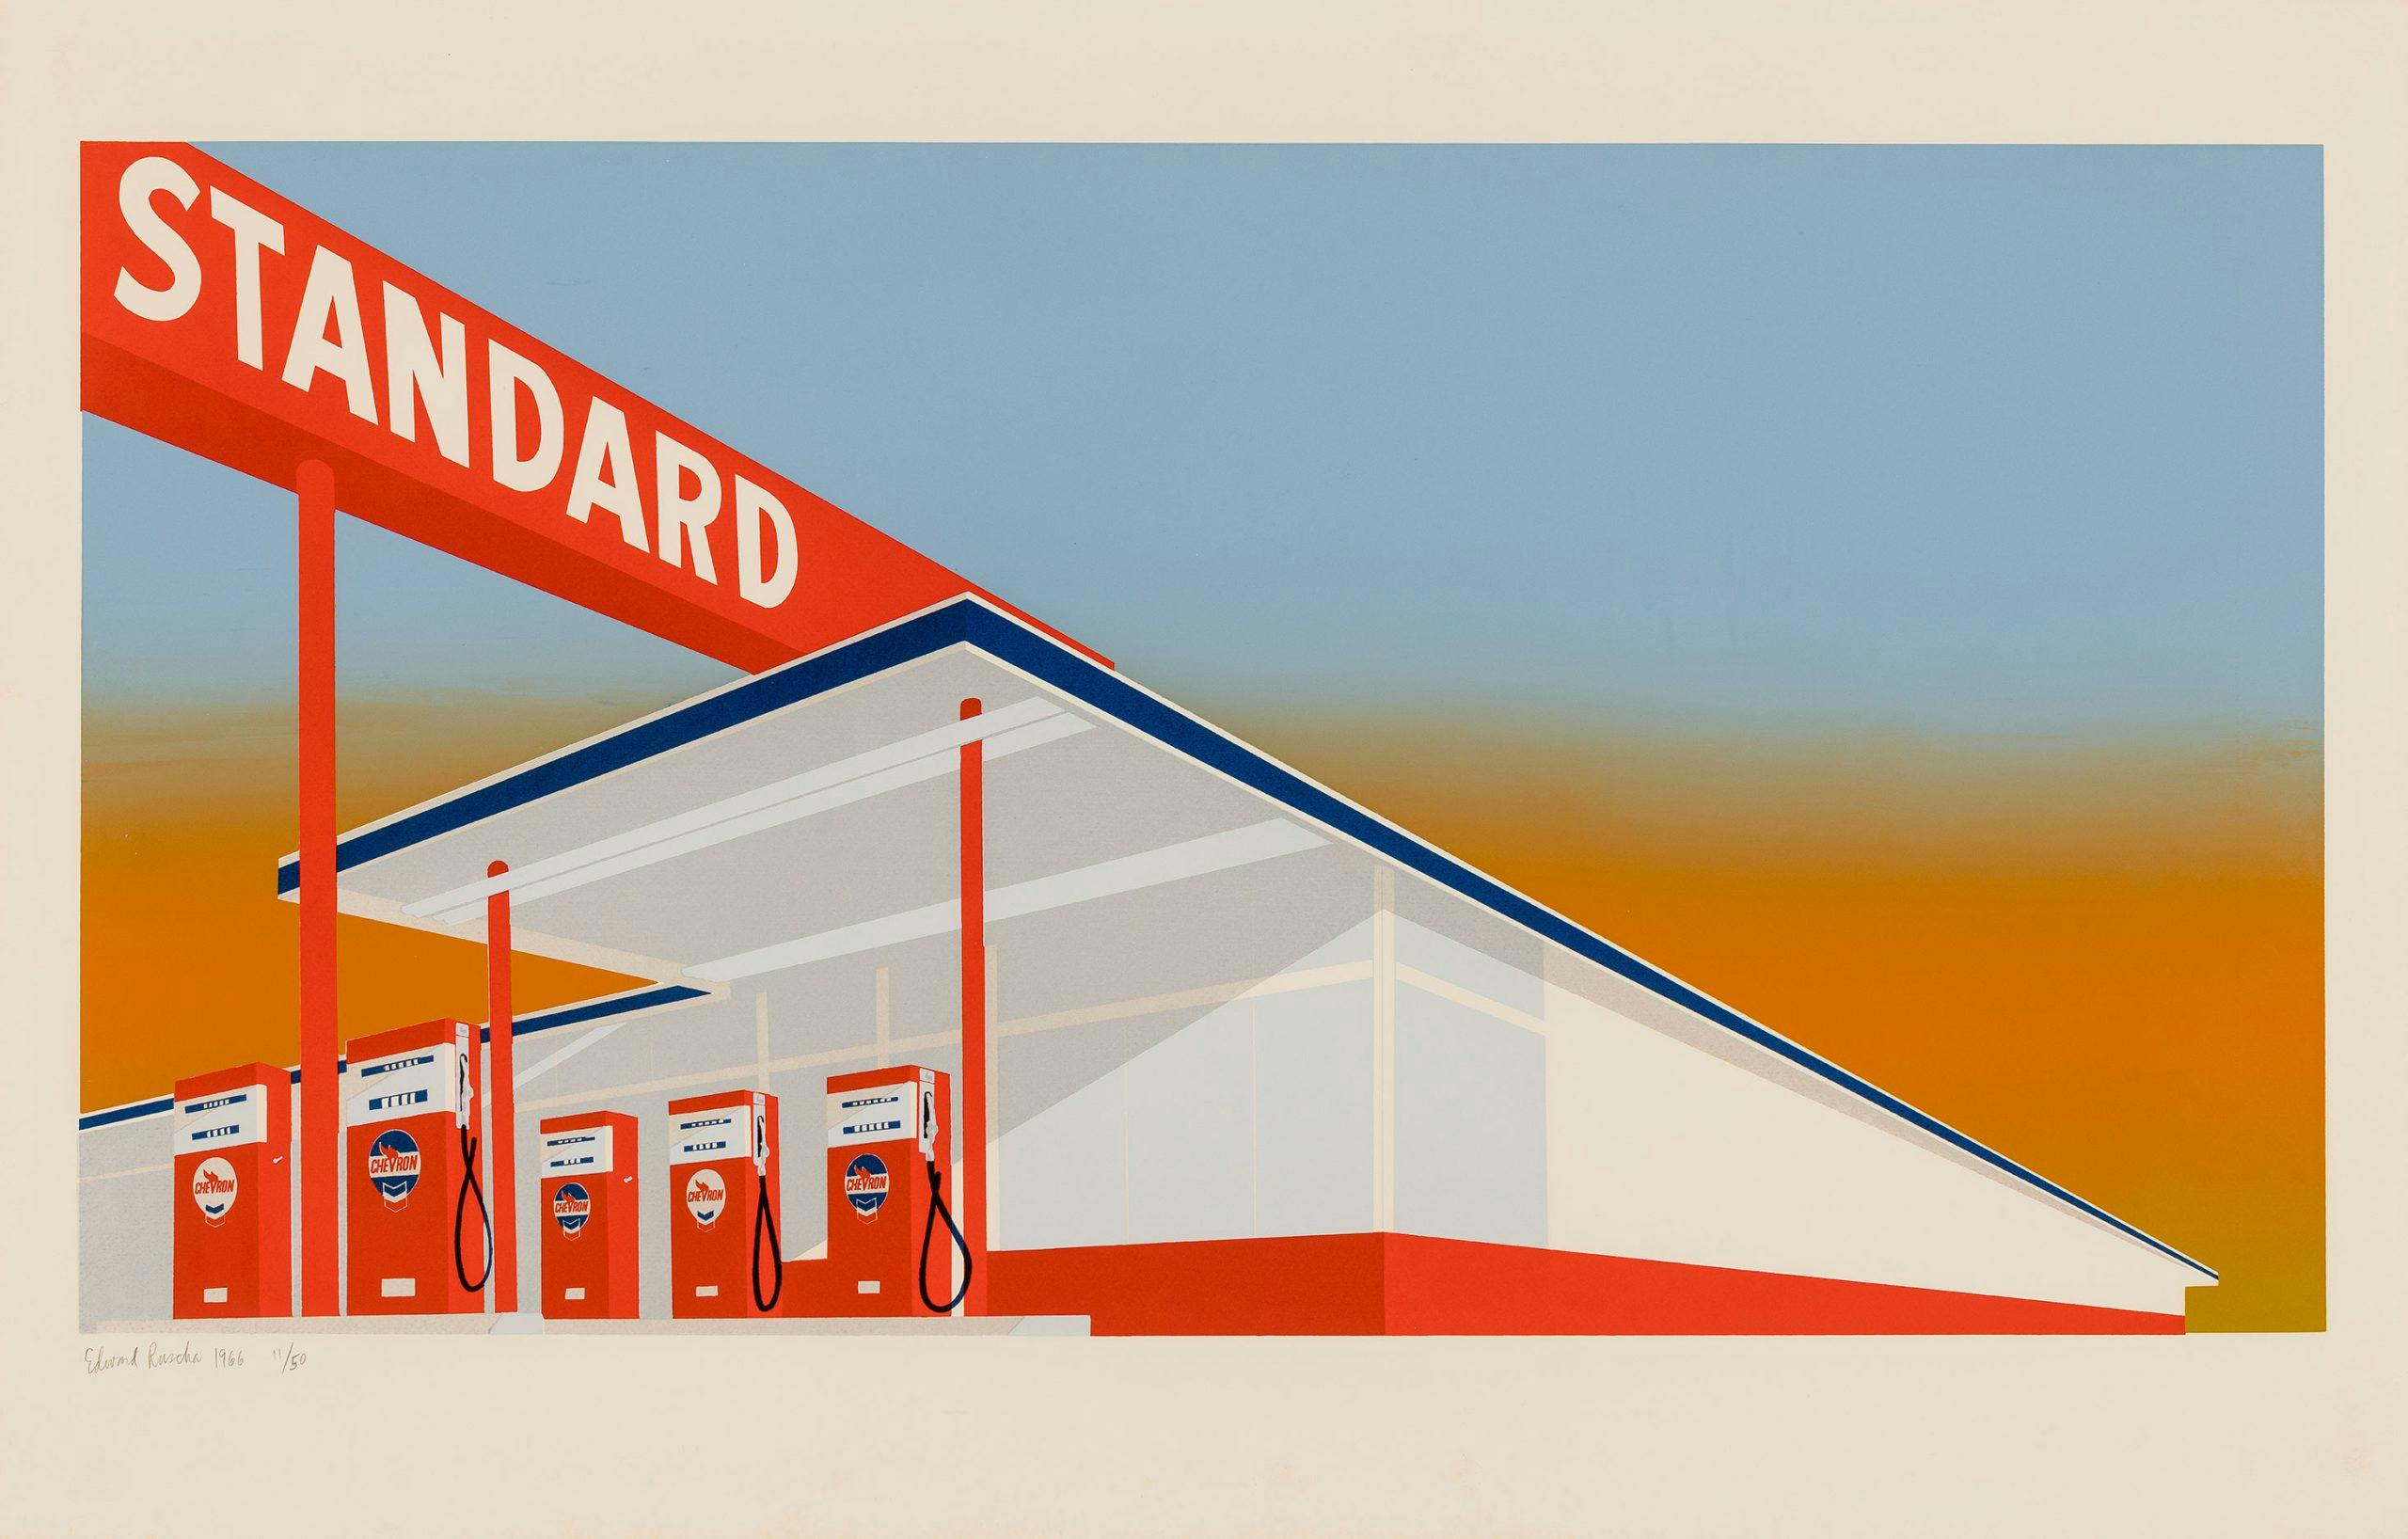 A pop art-style image depicts a bright, minimalist gas station under a clear sky. The station features prominent "STANDARD" branding in bold red letters on a white and blue canopy. Four gas pumps with retro designs stand beneath the canopy.